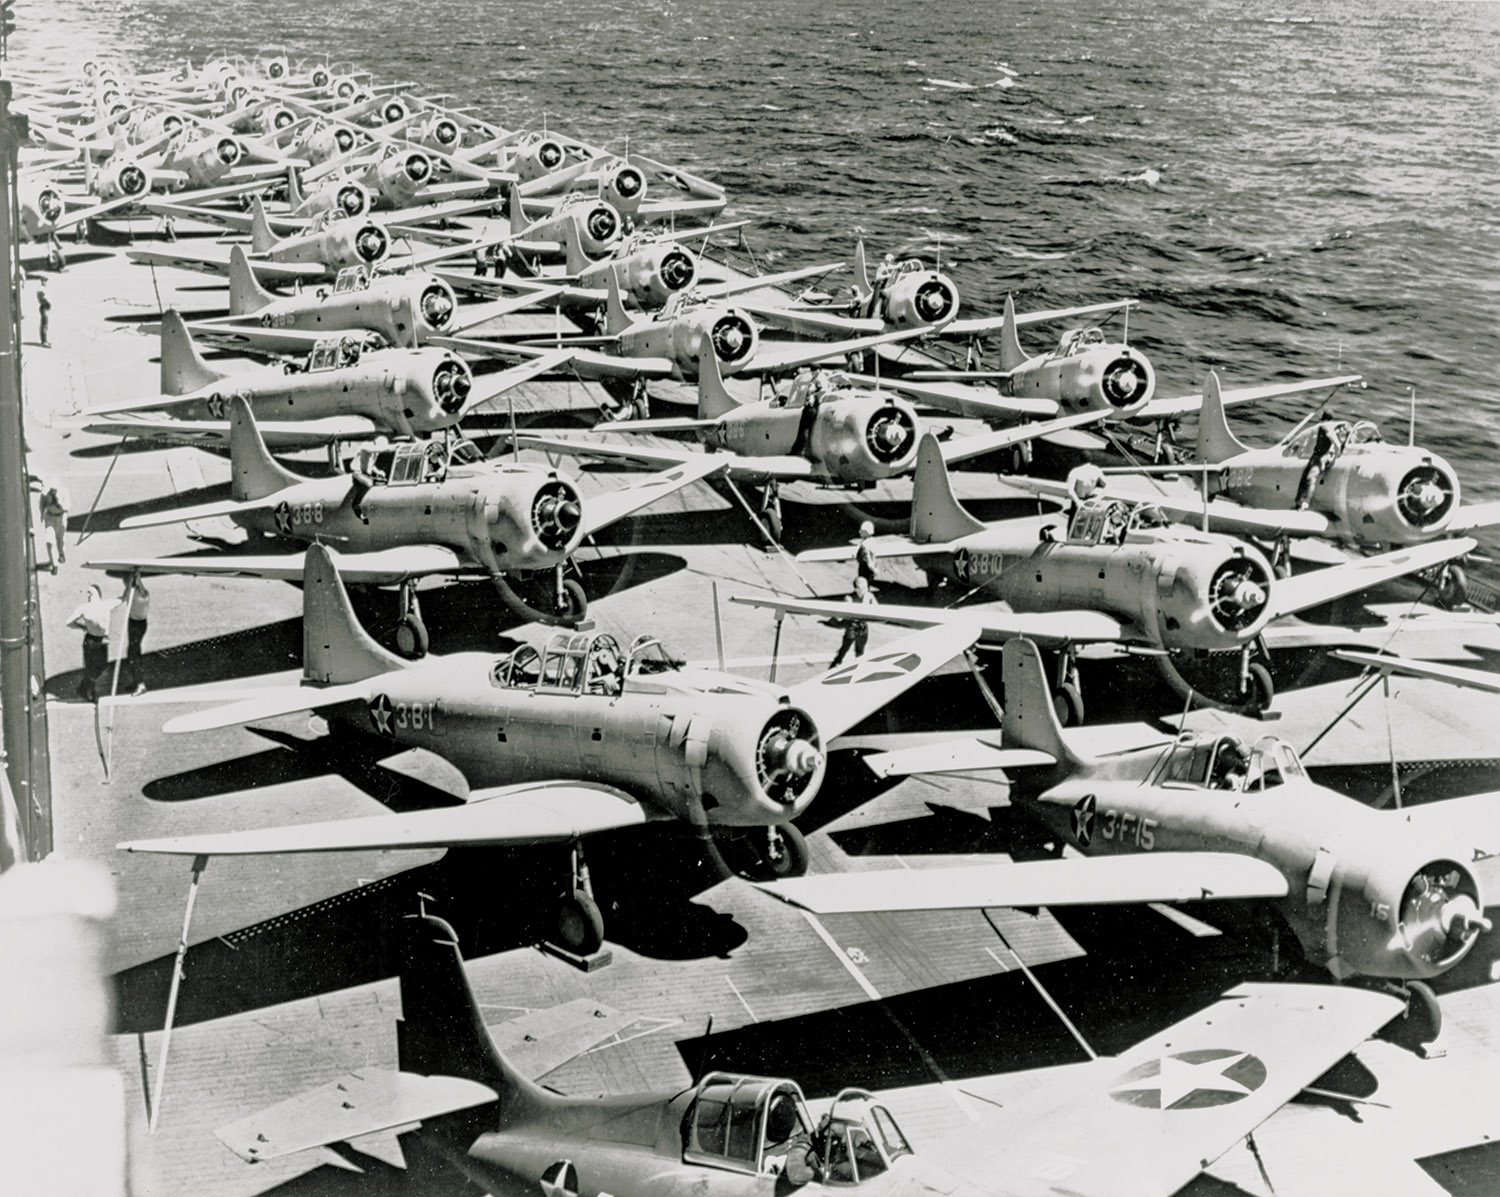 USS Saratoga flight deck circa fall 1941 with Grumman F4F-3 aircraft in the foreground and Douglas SBD-3 Dauntless and TBD-1 Devastator aircraft parked further back.